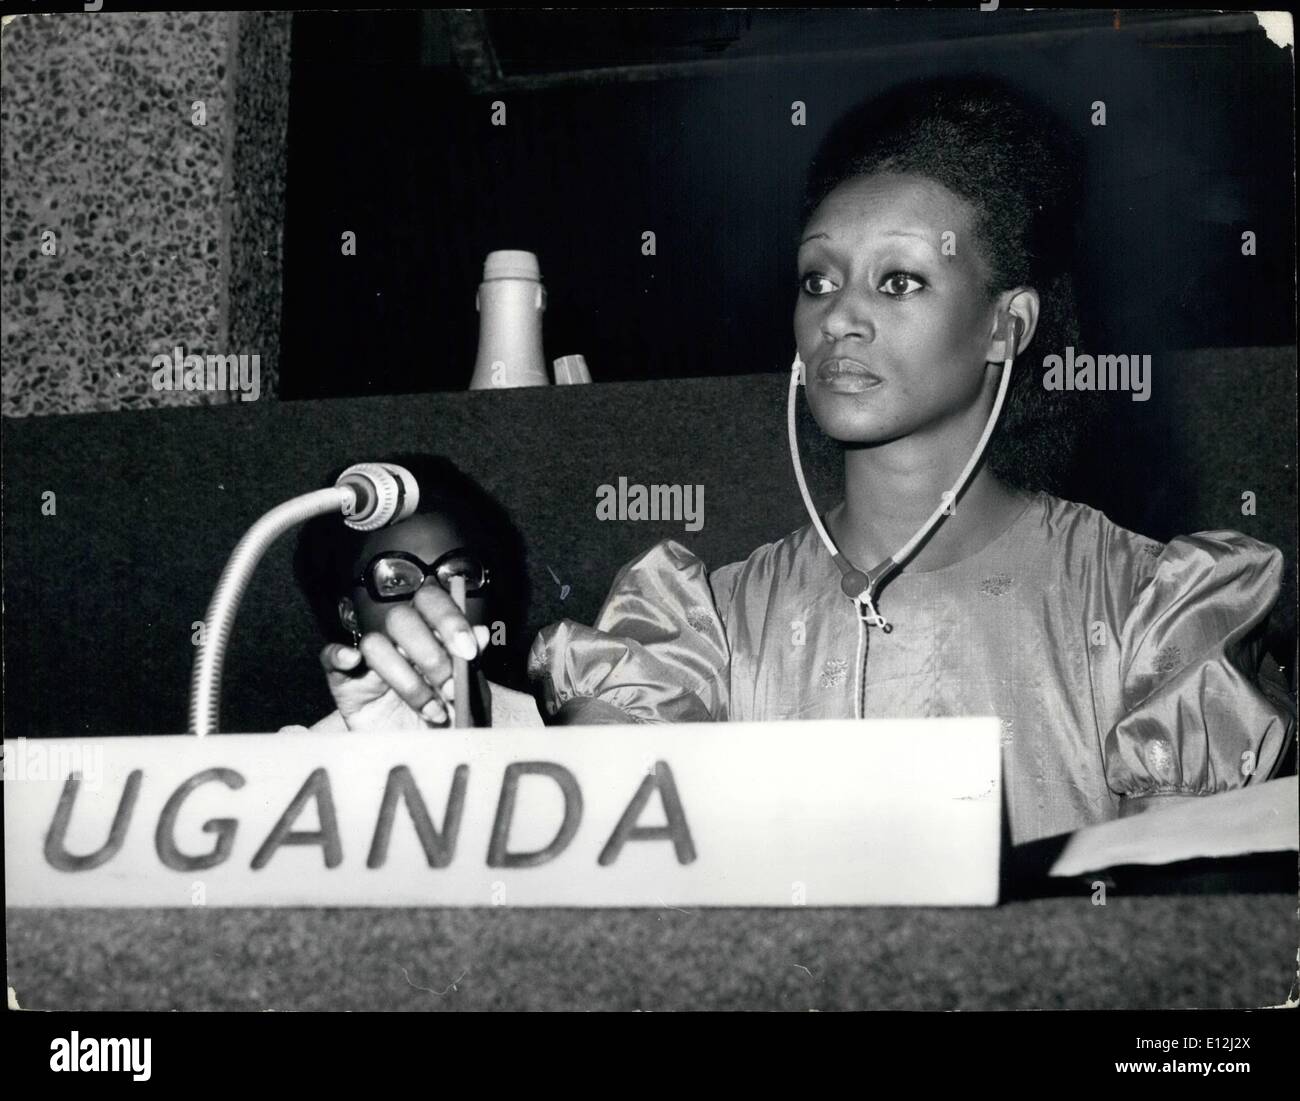 Feb. 24, 2012 - Miss ELIZABETH EDITH CHRISTABEL BAGAAYA, Foreign Minister of Uganda Formerly Princess Elizabeth of Toro. Dorn Uganda, 1940. Educated privately in Uganda and at Sherbaurne -School for Girls in England. University: Cambridge. Qualified as Barrister, 1965. East Africa, first practising woman barrister, 1966. Left Uganda following Oboia's dissolution of the monarchies, 1968. International fame as model, 1968 - 1969. Flayed in Hollywood version of ''Bullfrog in the Sun'', 1970. Returned to Uganda after coup, 1971, Appointed Roving Ambassador by President Amin, 1771 Stock Photo